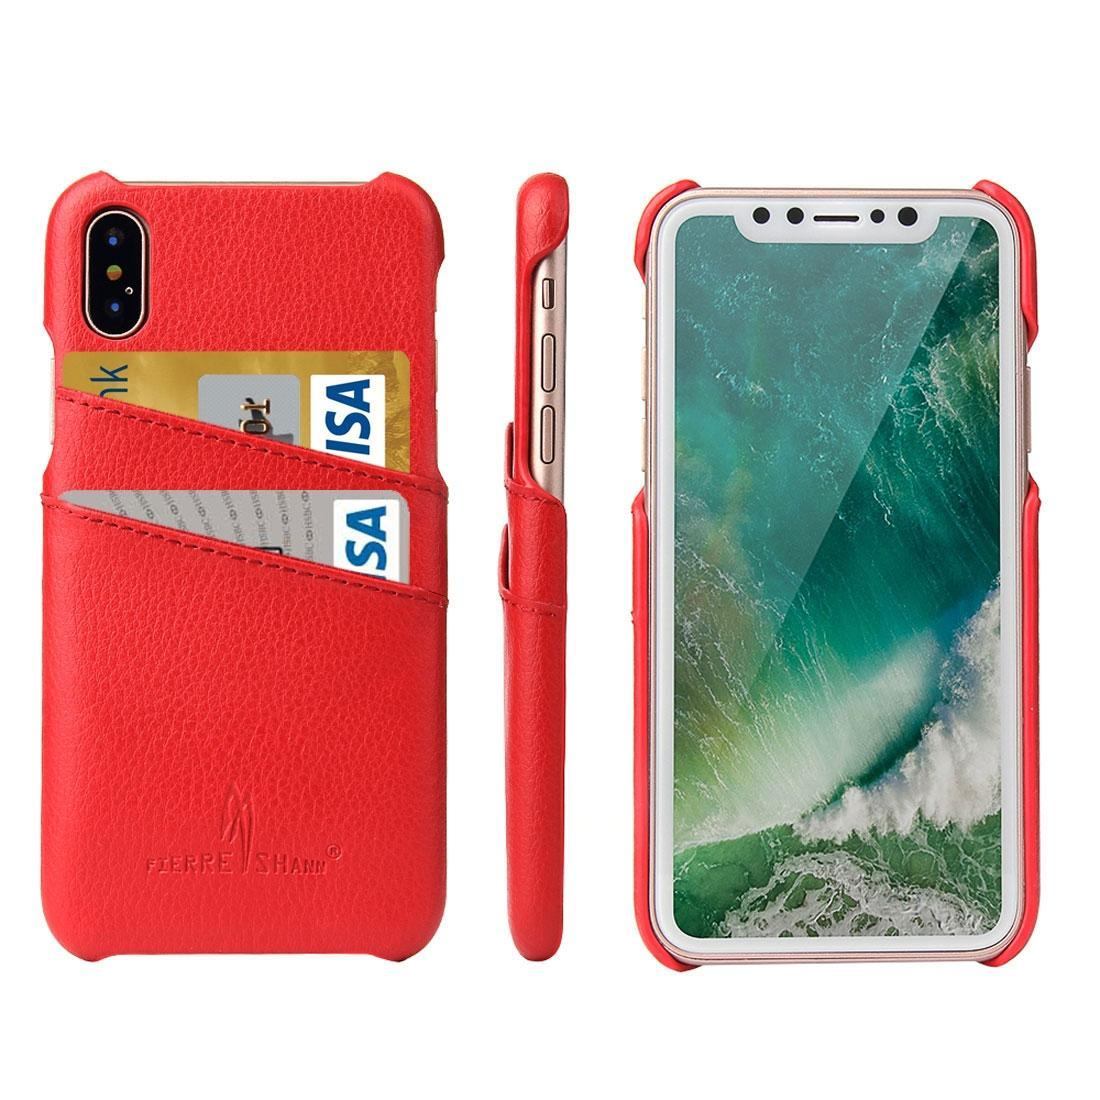 For iPhone XS,X Case,Elegant Handmade Durable Genuine Leather Fashion Cover,Red